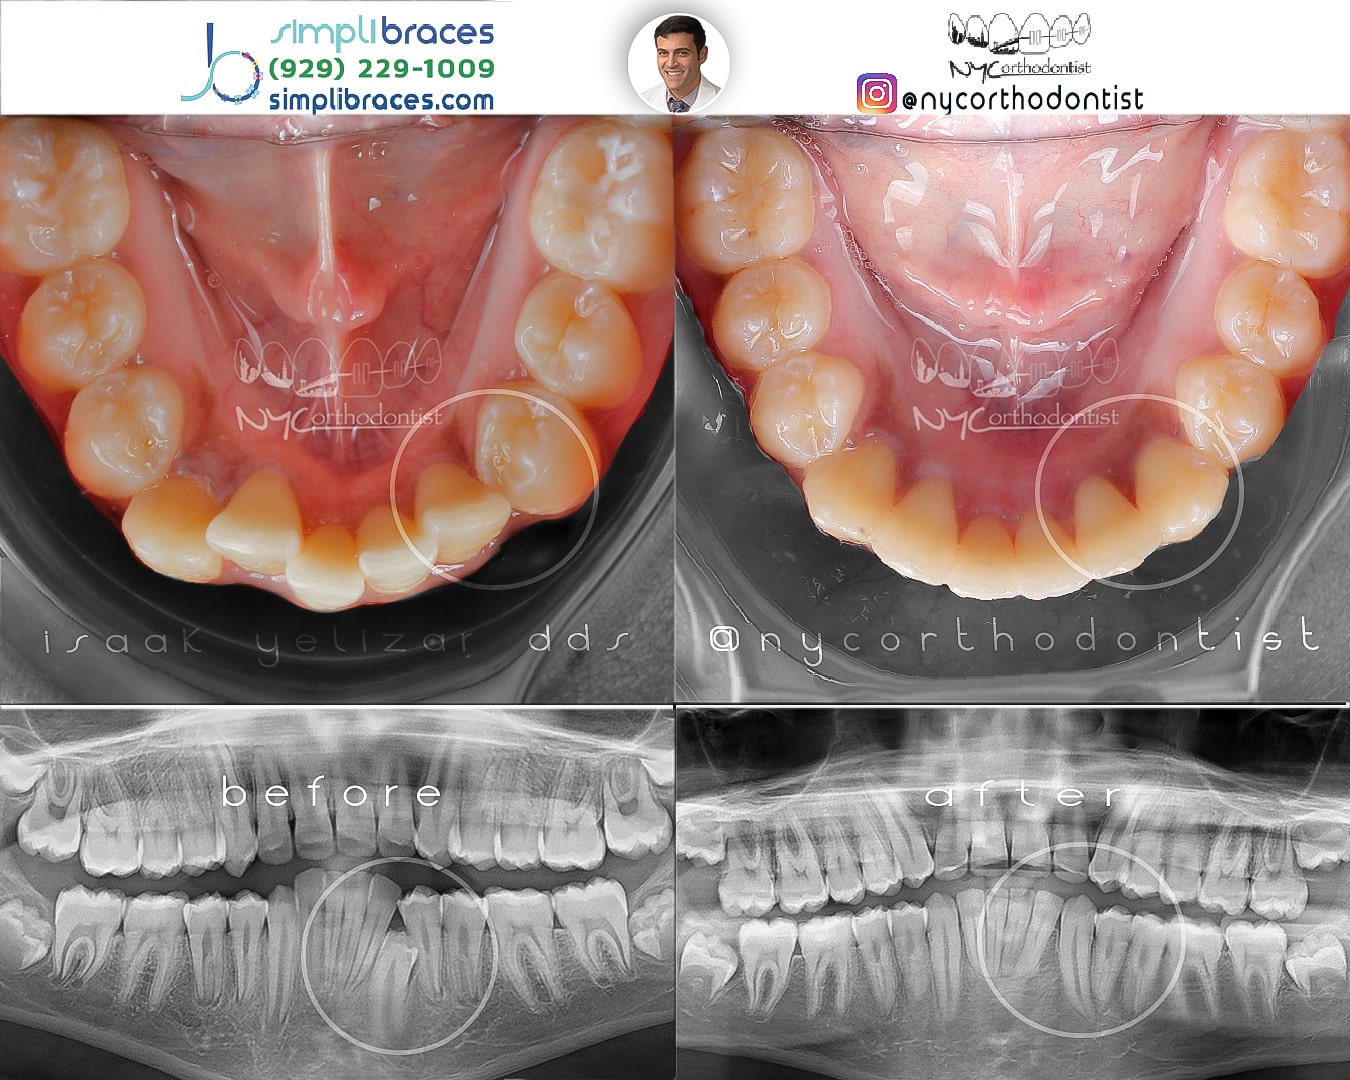 Inside of bottom teeth and x-ray of profile before and after treatment for crowding